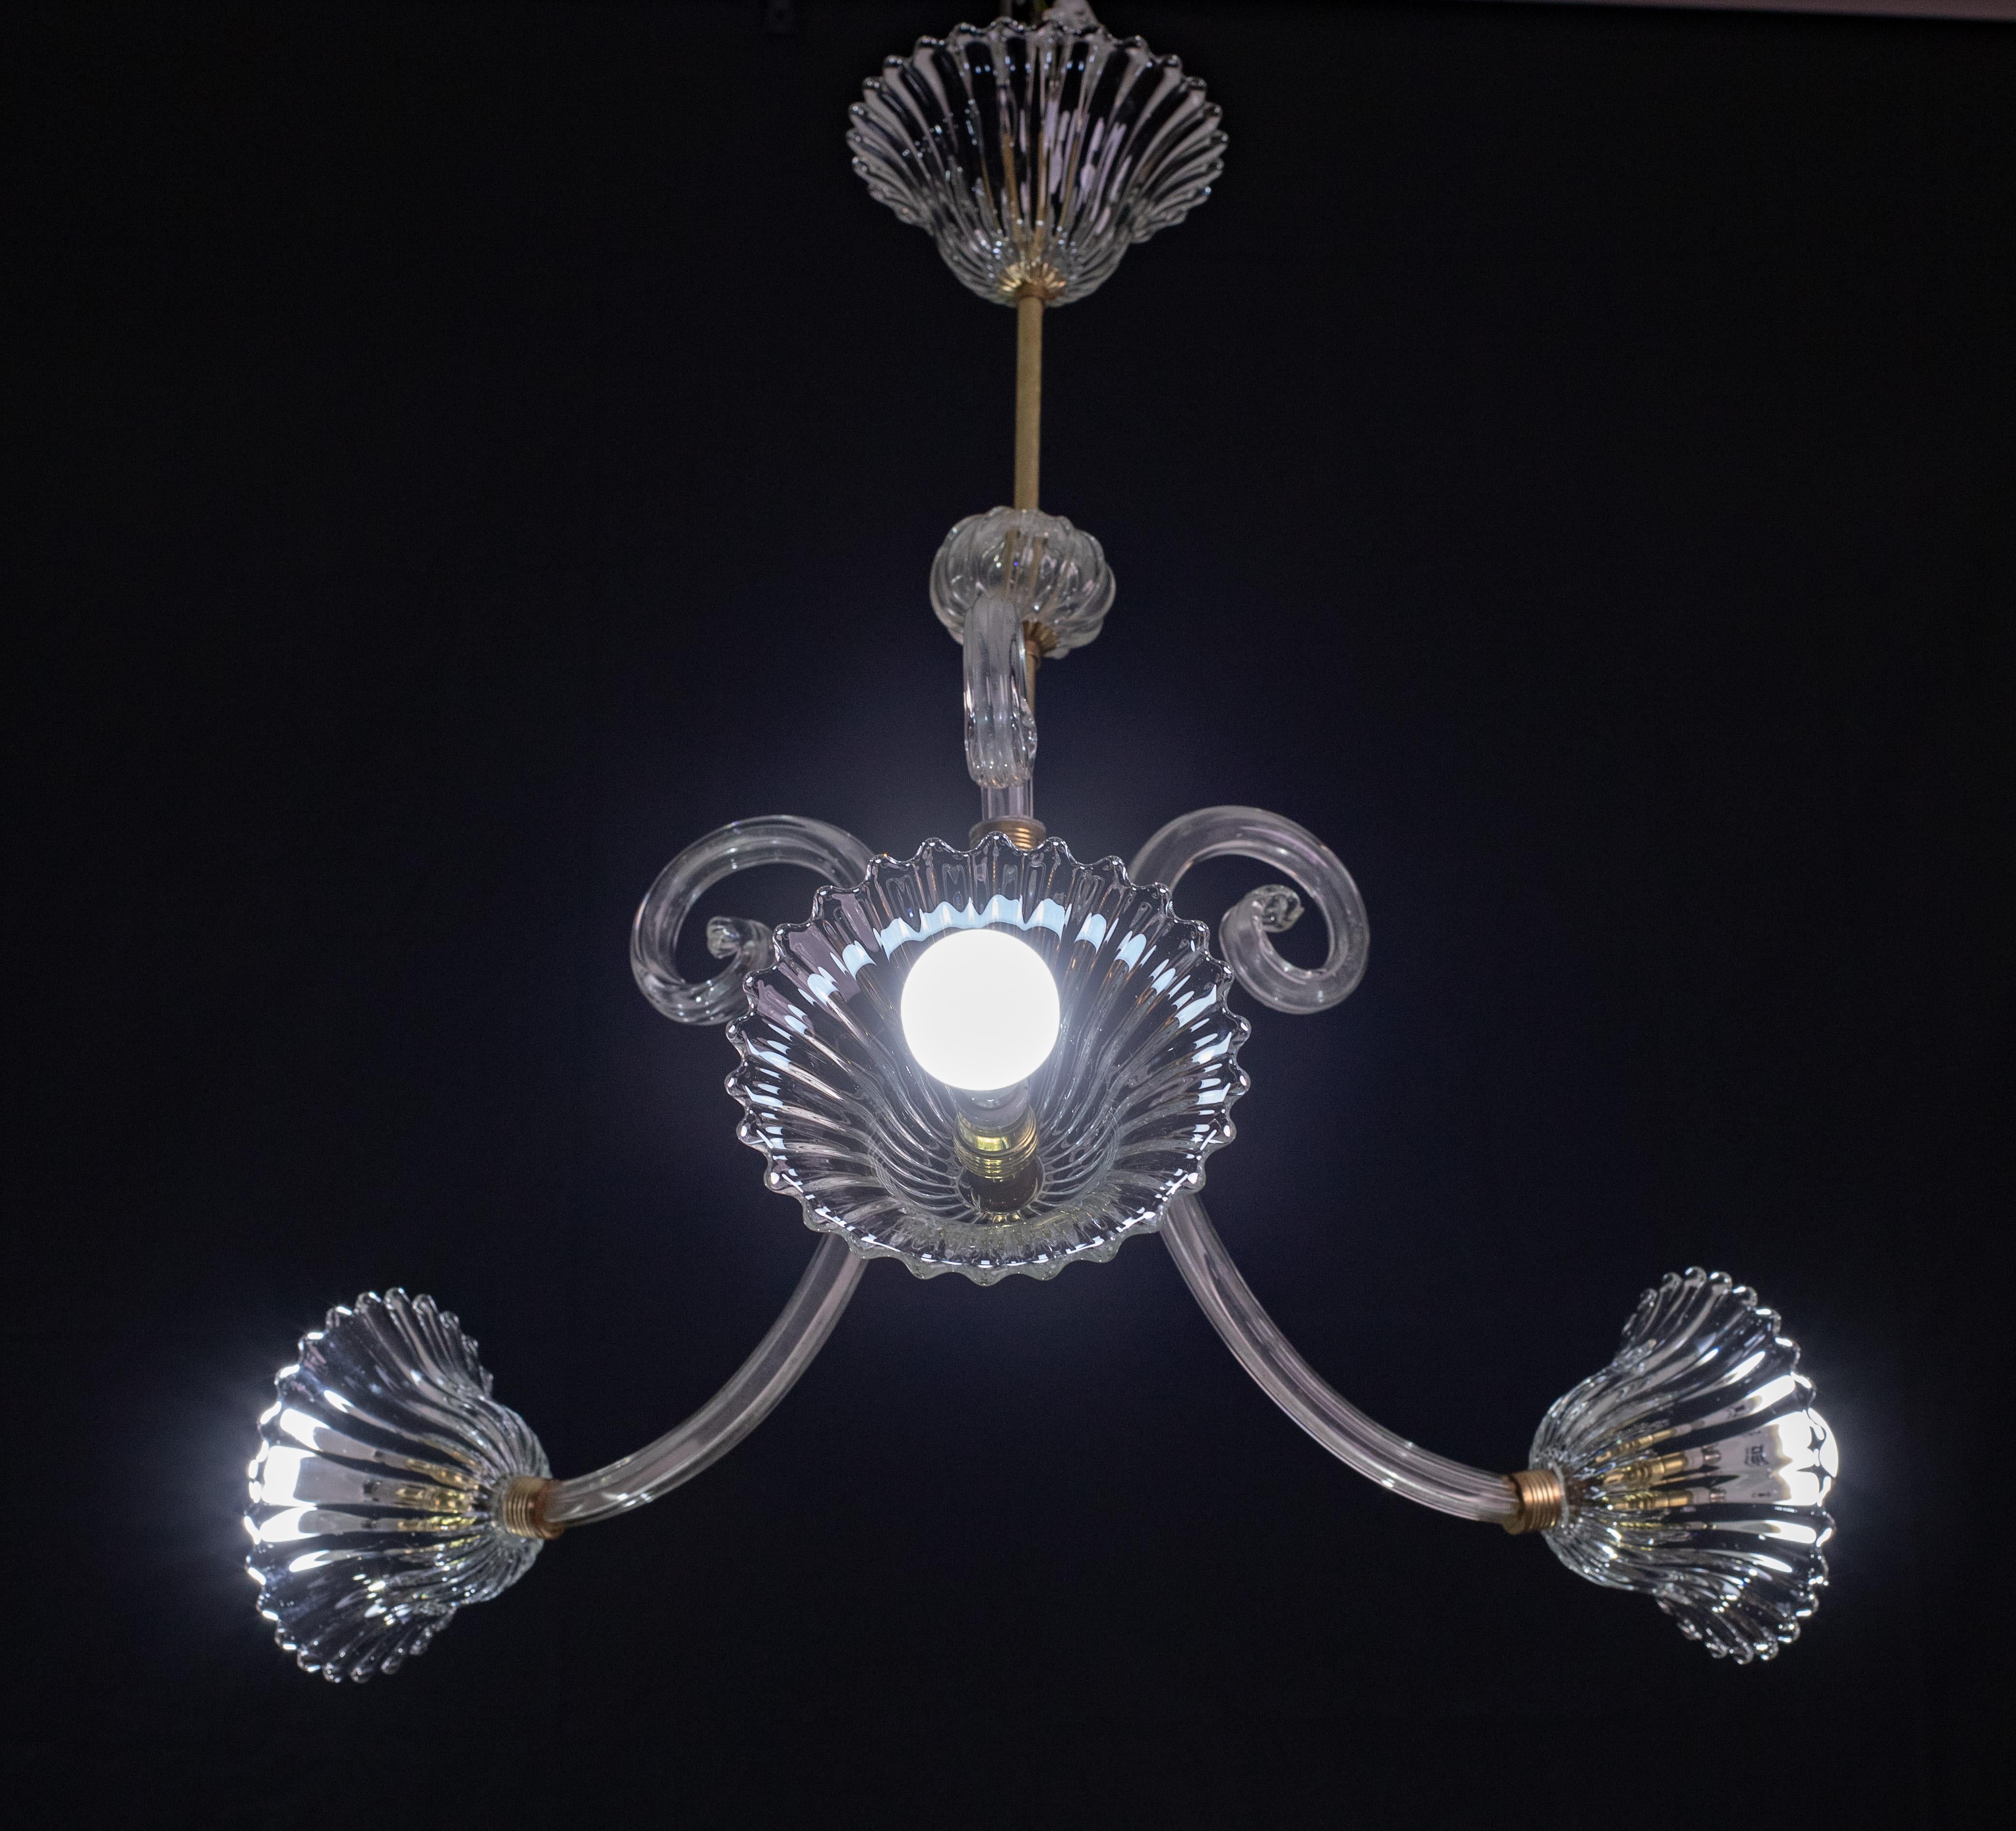 Exquisite three-armed, three-leafed model.

Period: circa 1940

Height 70 centimeters, diameter 55 centimeters; a longer central rod can be put in upon request, making the chandelier 110 centimeters.

Excellent period condition.